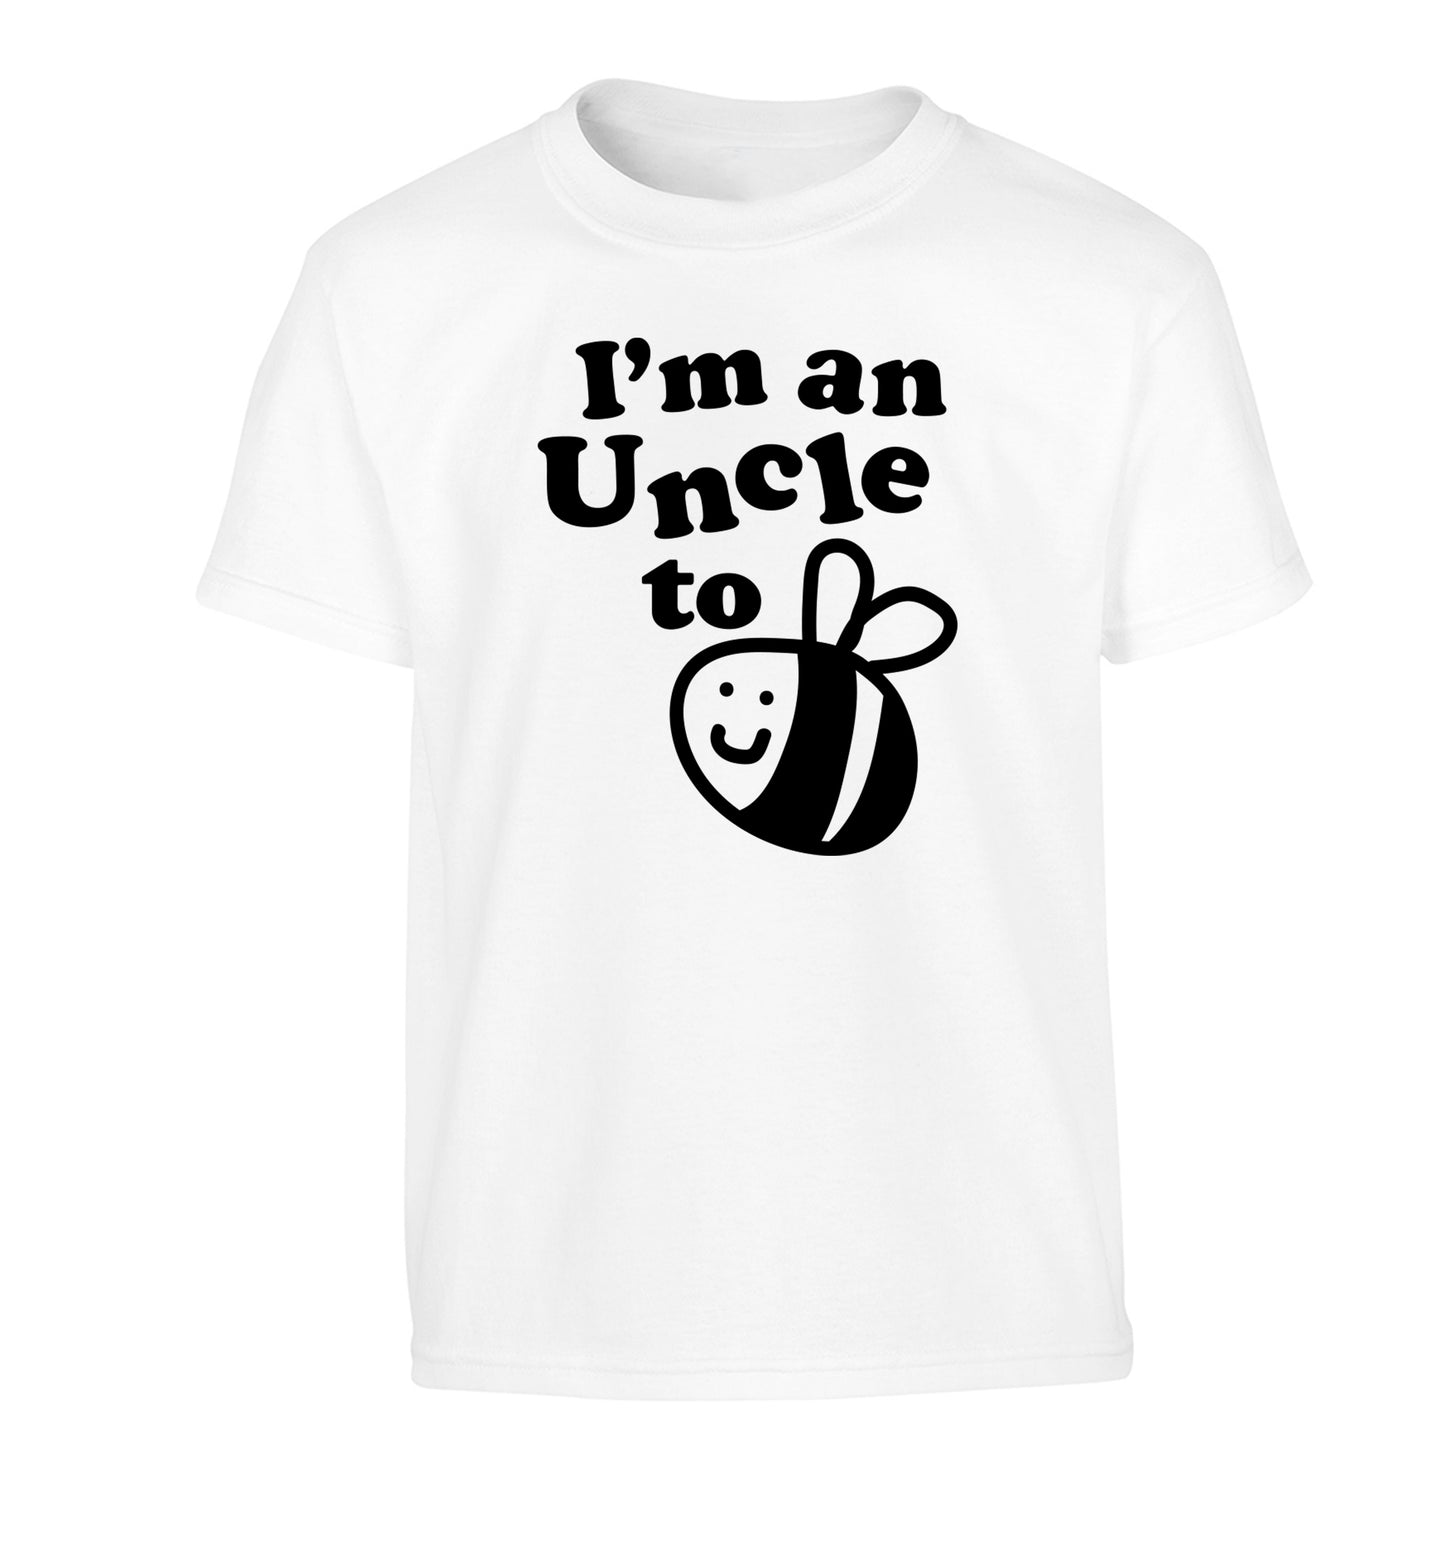 I'm an uncle to be Children's white Tshirt 12-14 Years